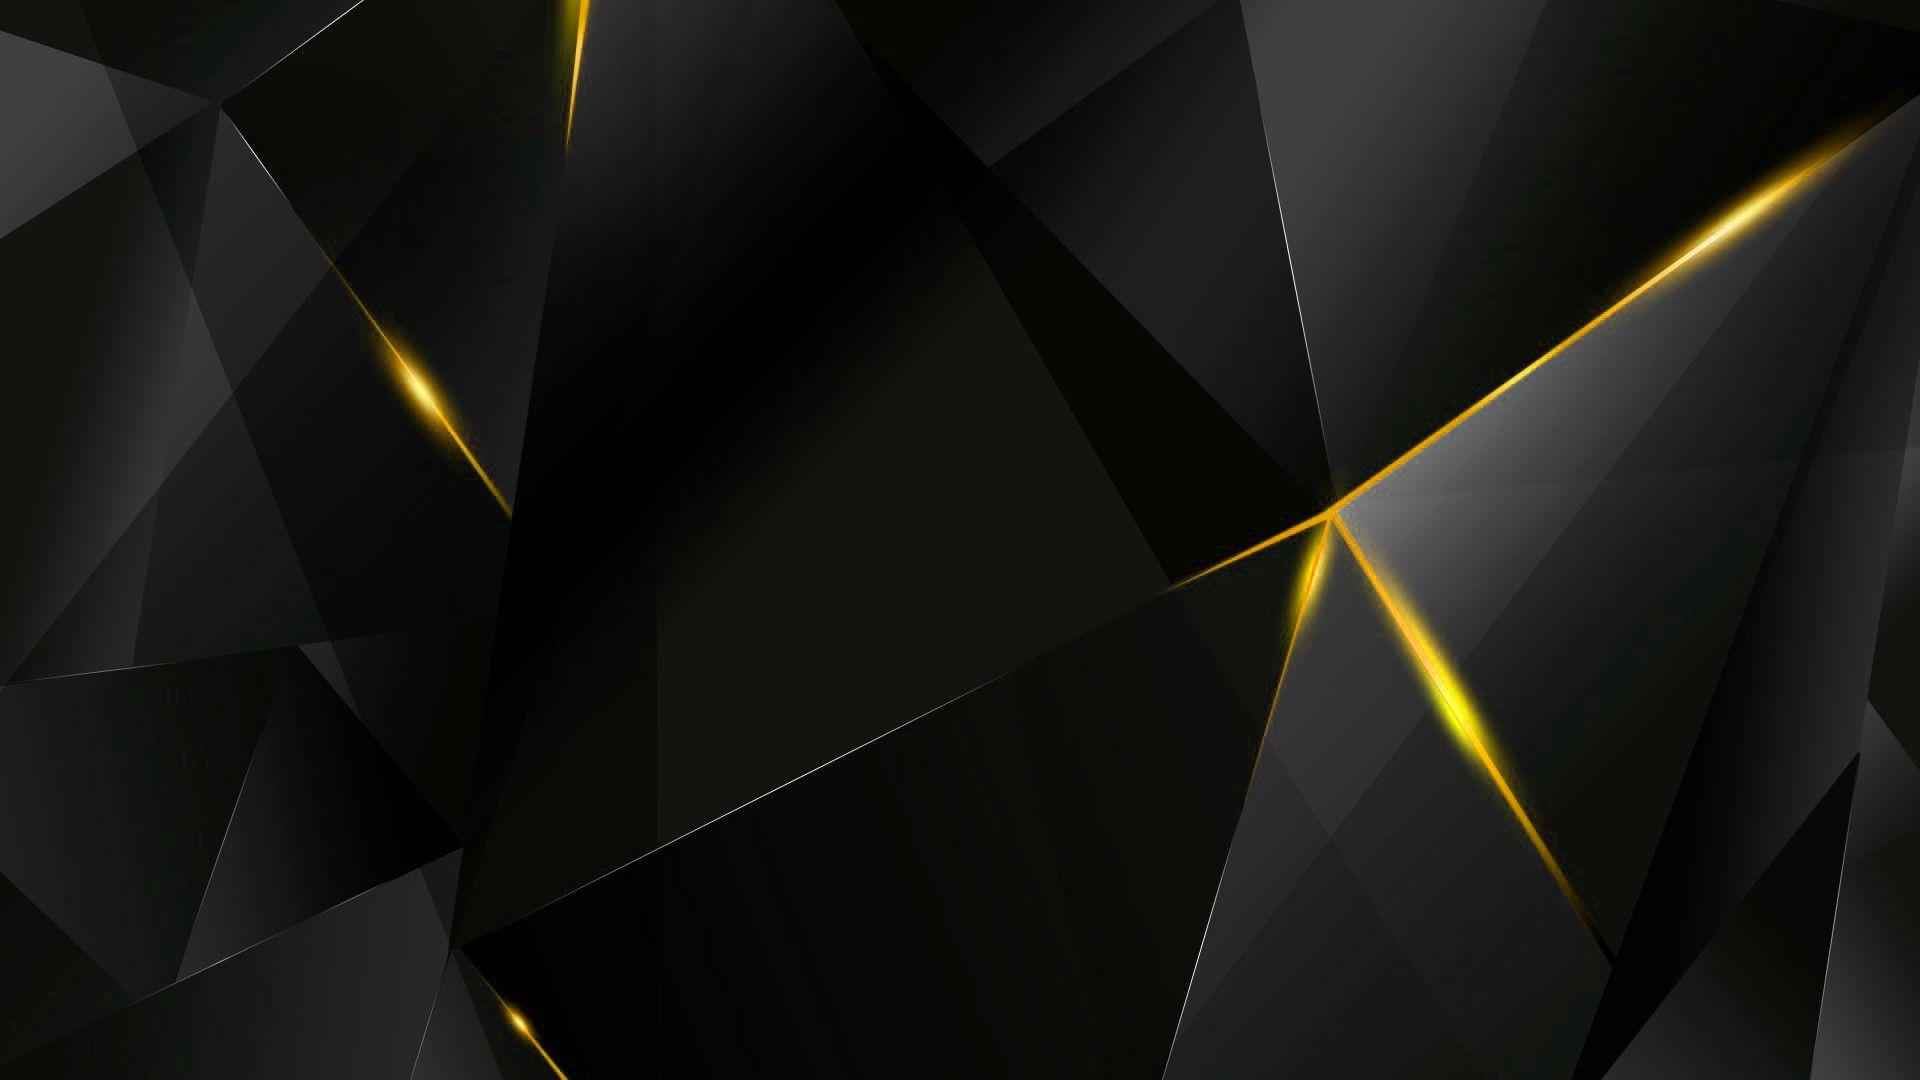 High Resolution Black And Yellow Wallpaper Hd 1080p